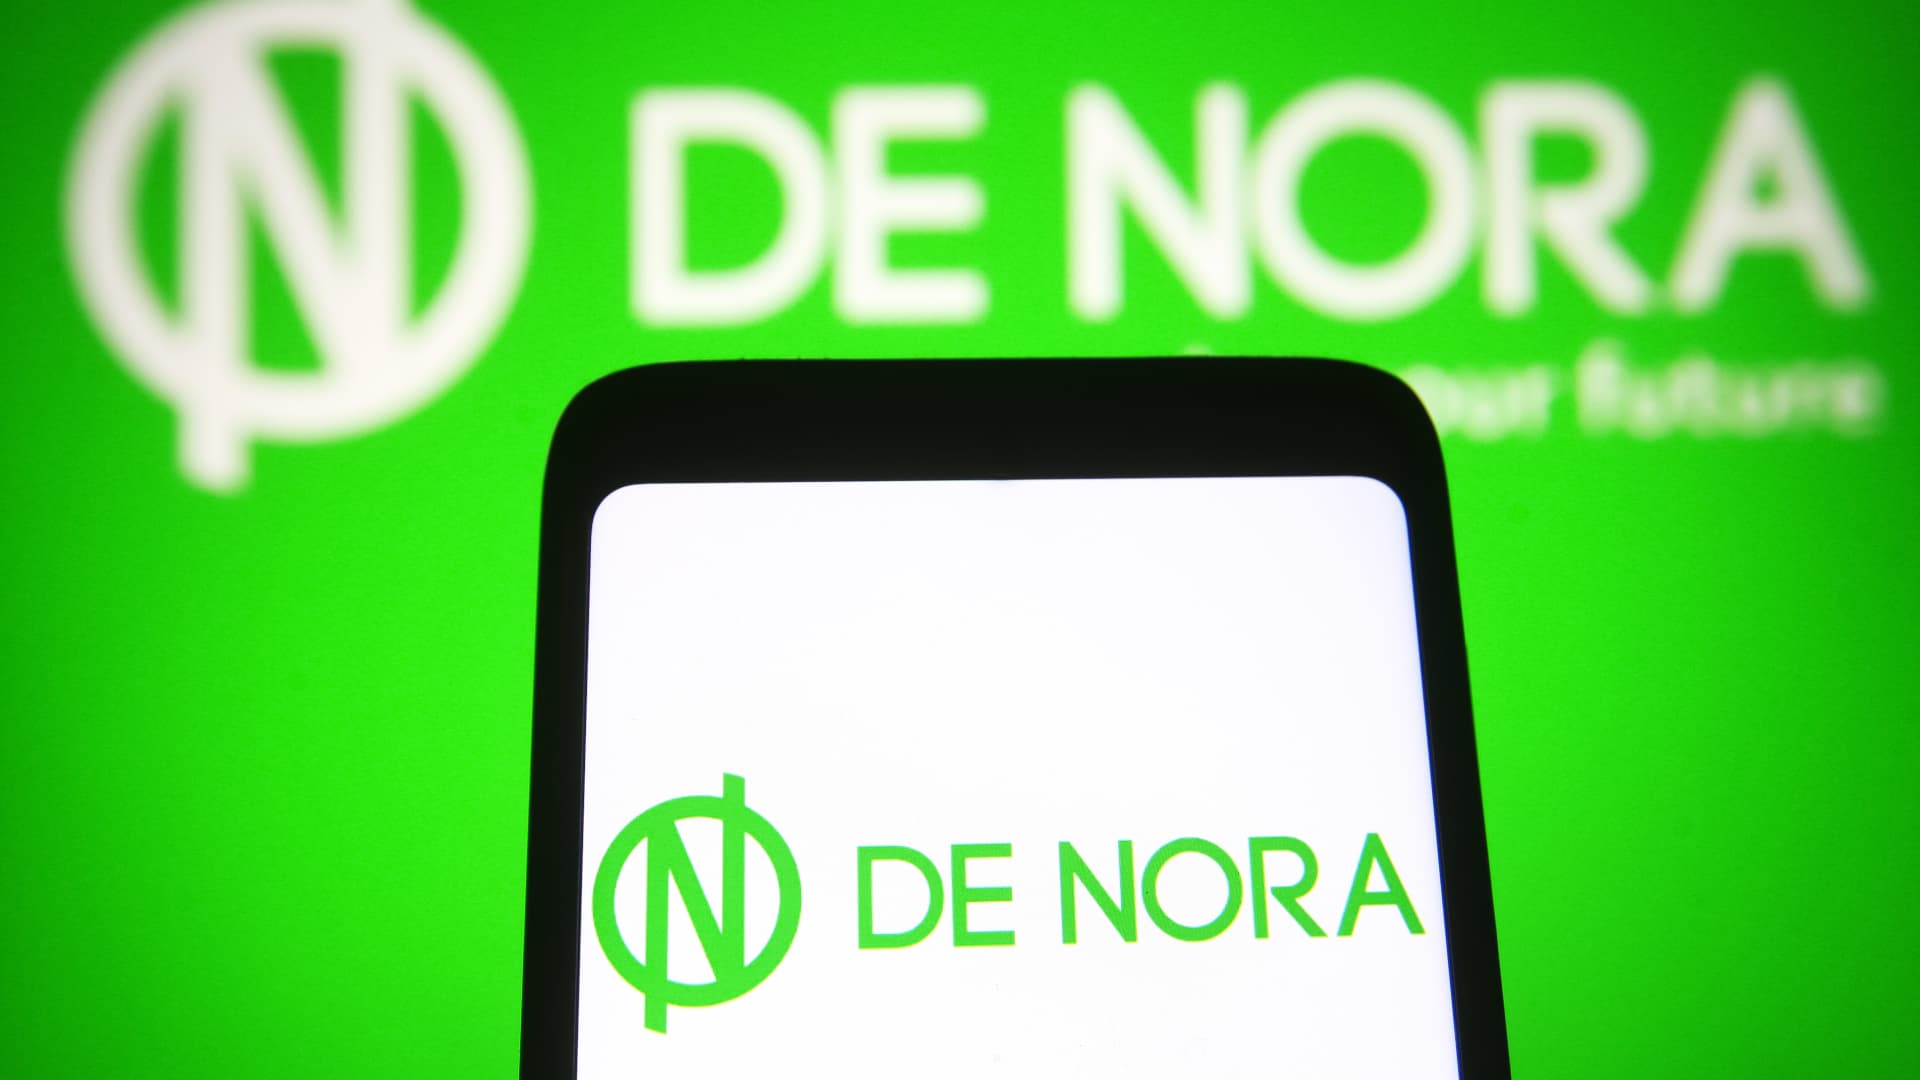 De Nora IPO priced at 13.50 euros according to proportion; .eight billion valuation